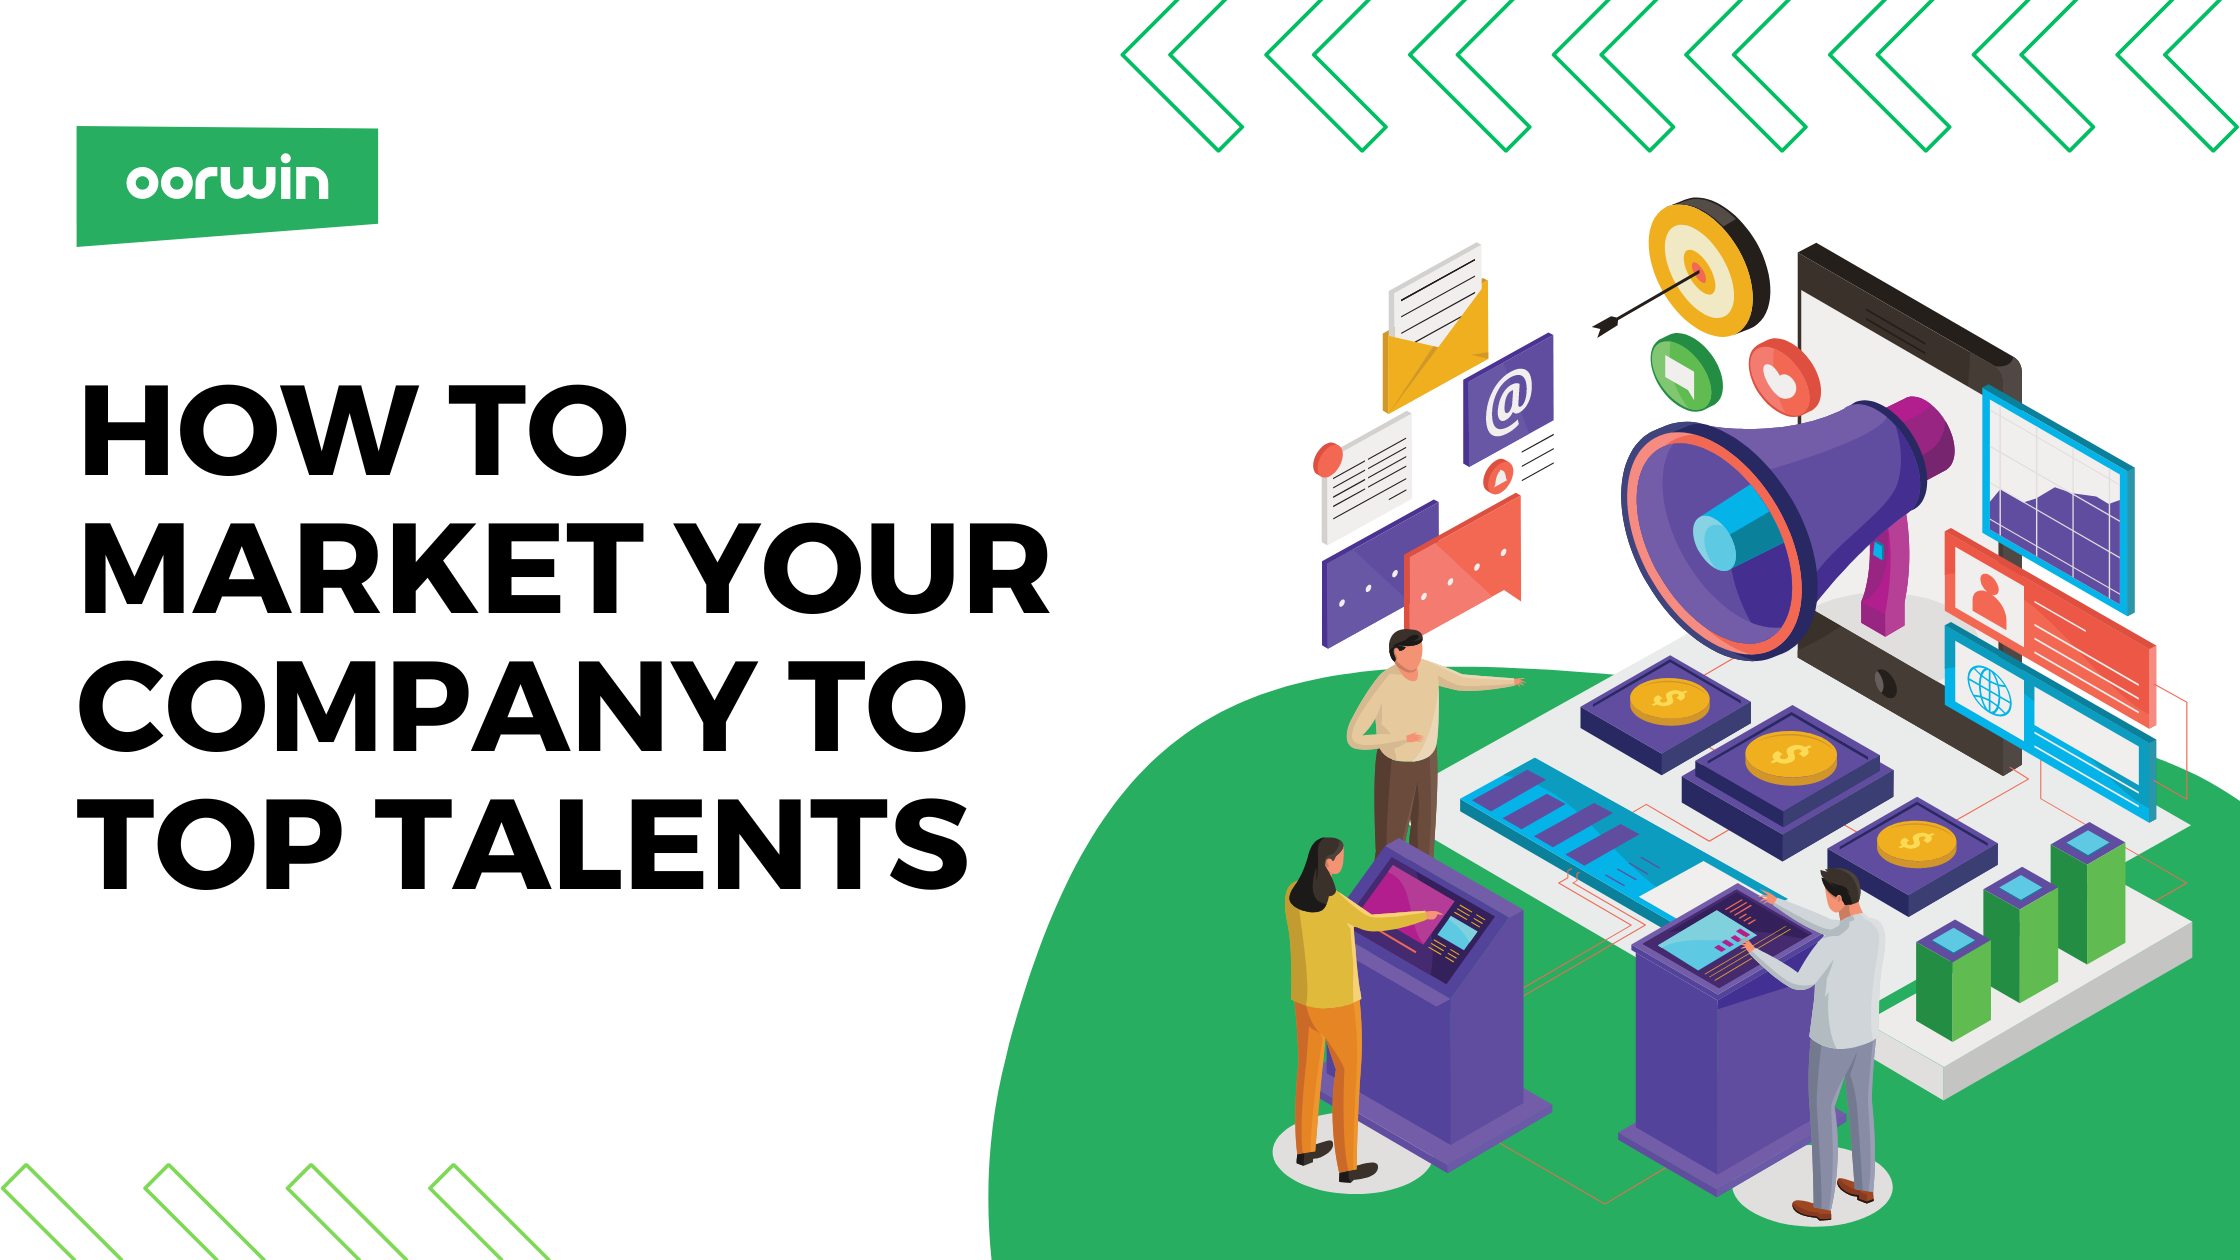 How to Market Your Company to Top Talents